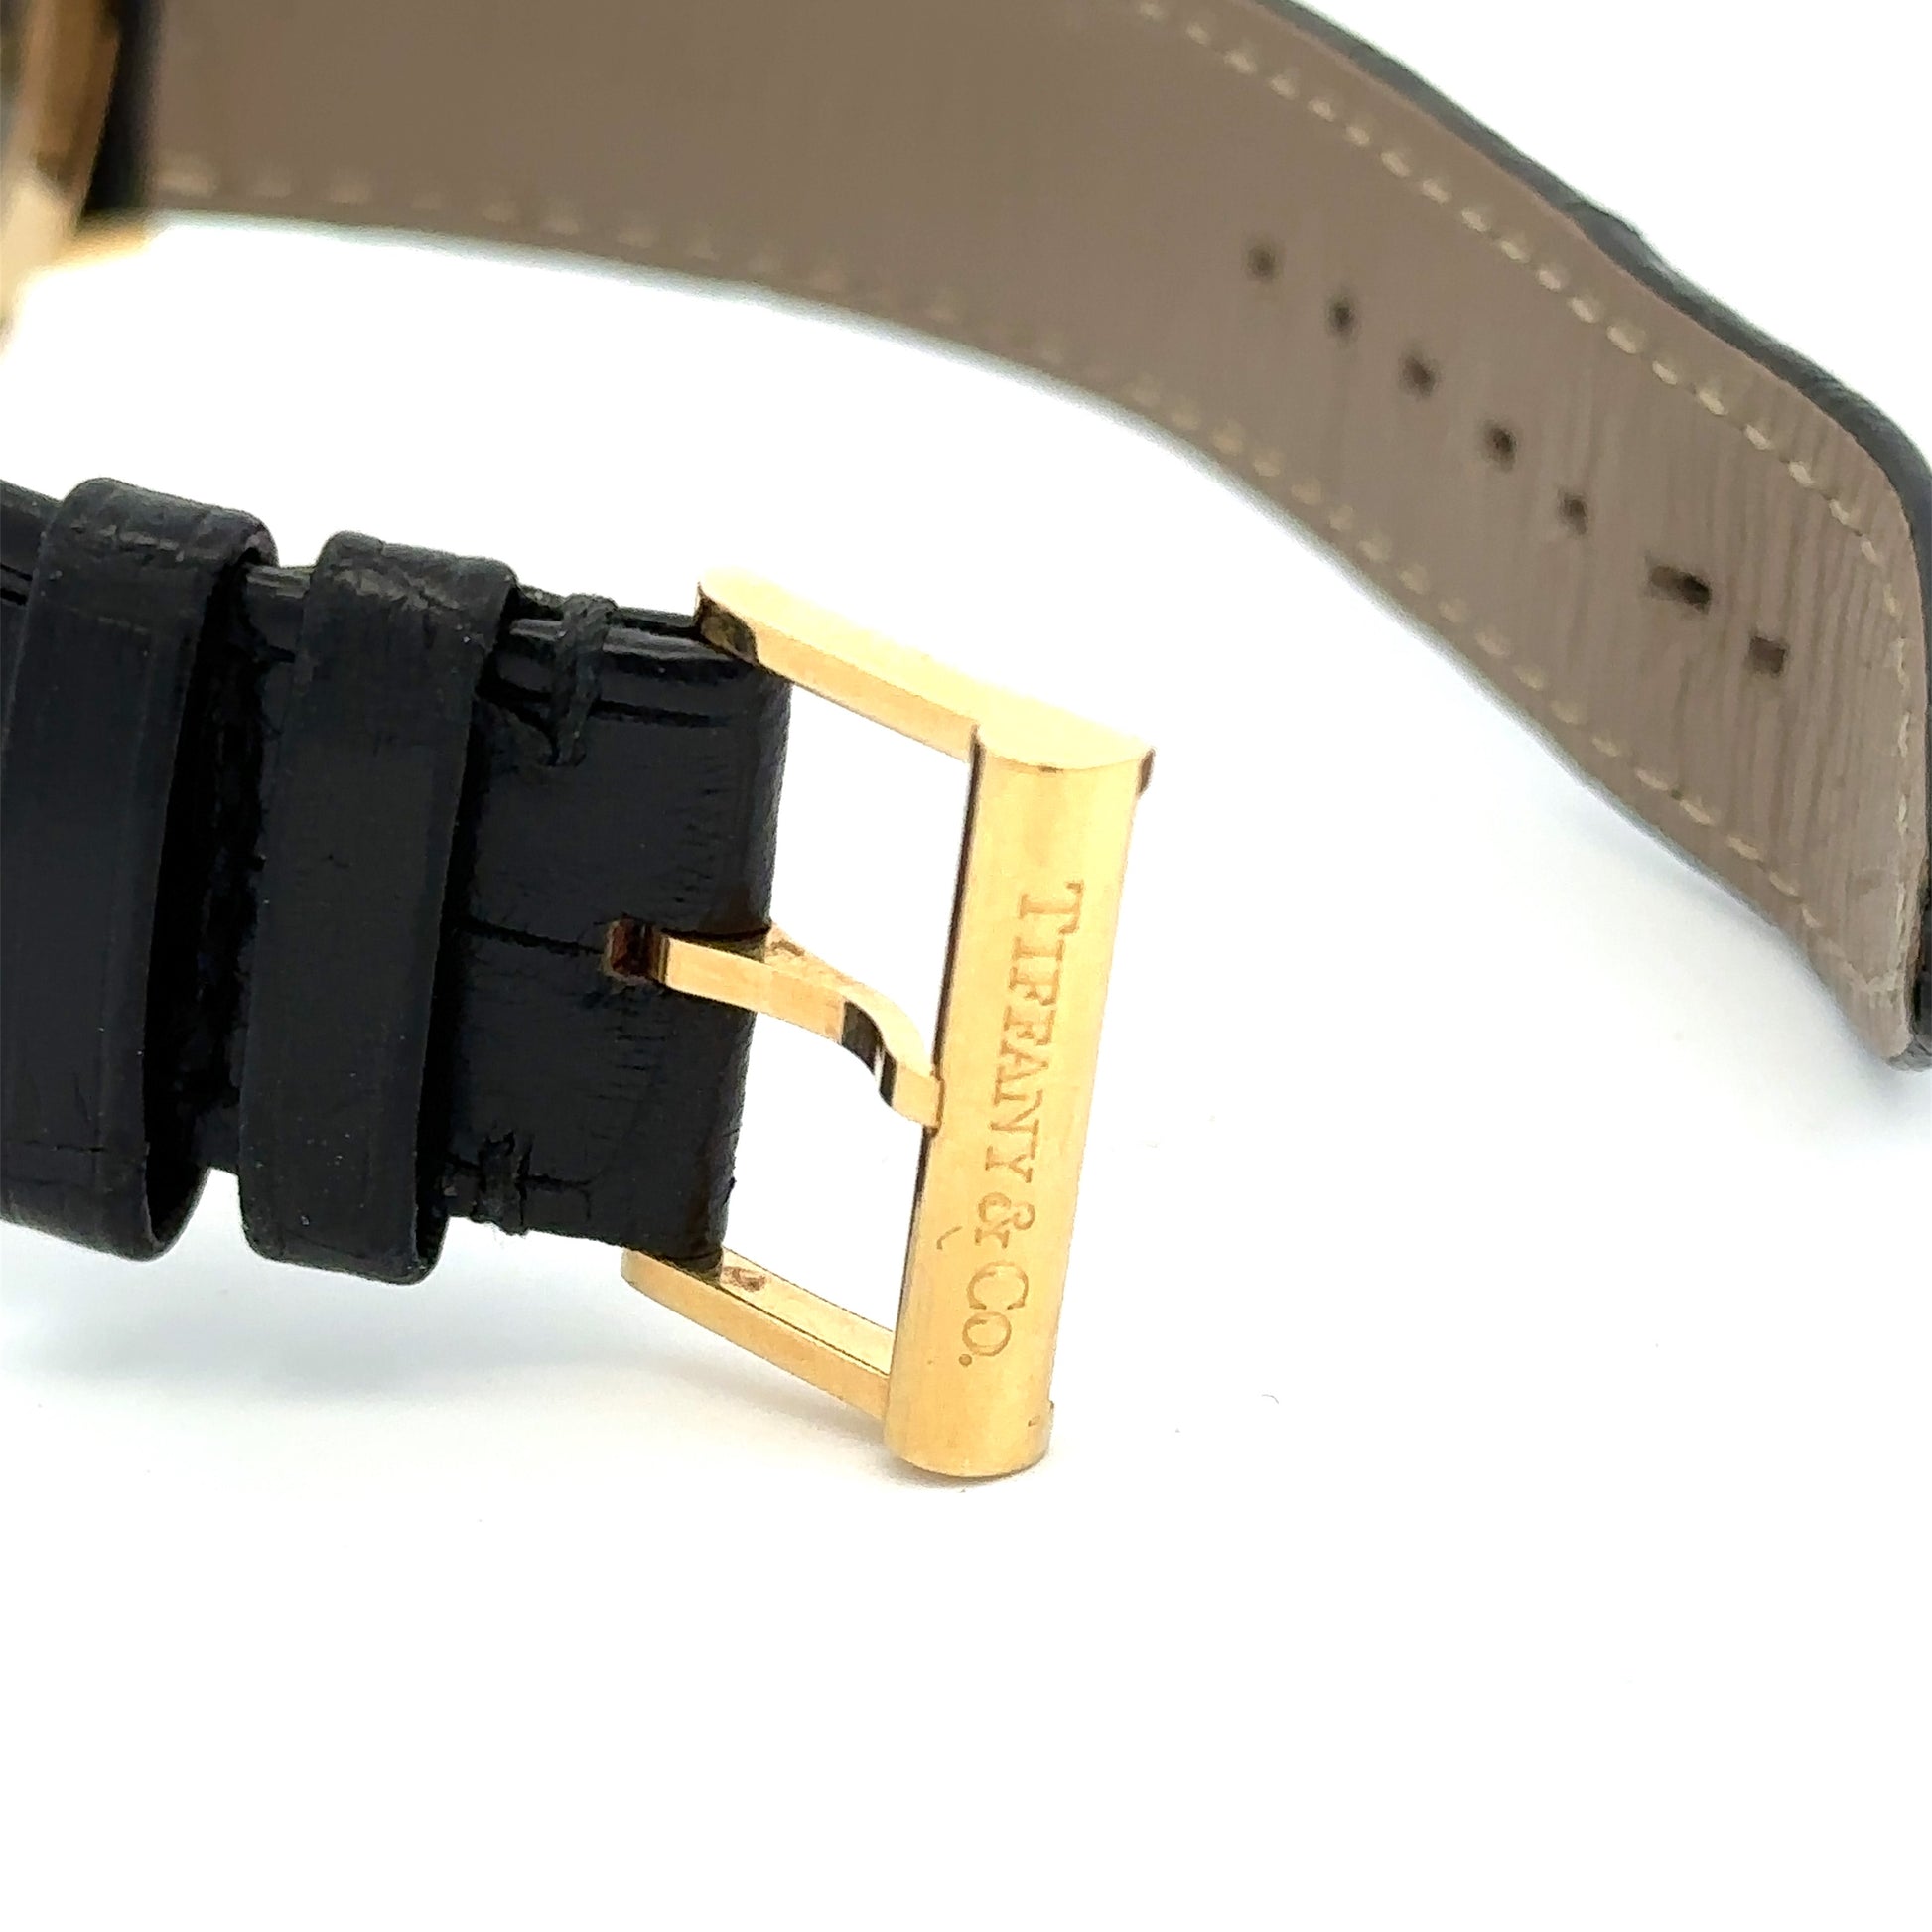 Tiffany & Co watch clasp. Scratches on 18K yellow gold. Wear on the leather band. Inside of the leather band is grey.